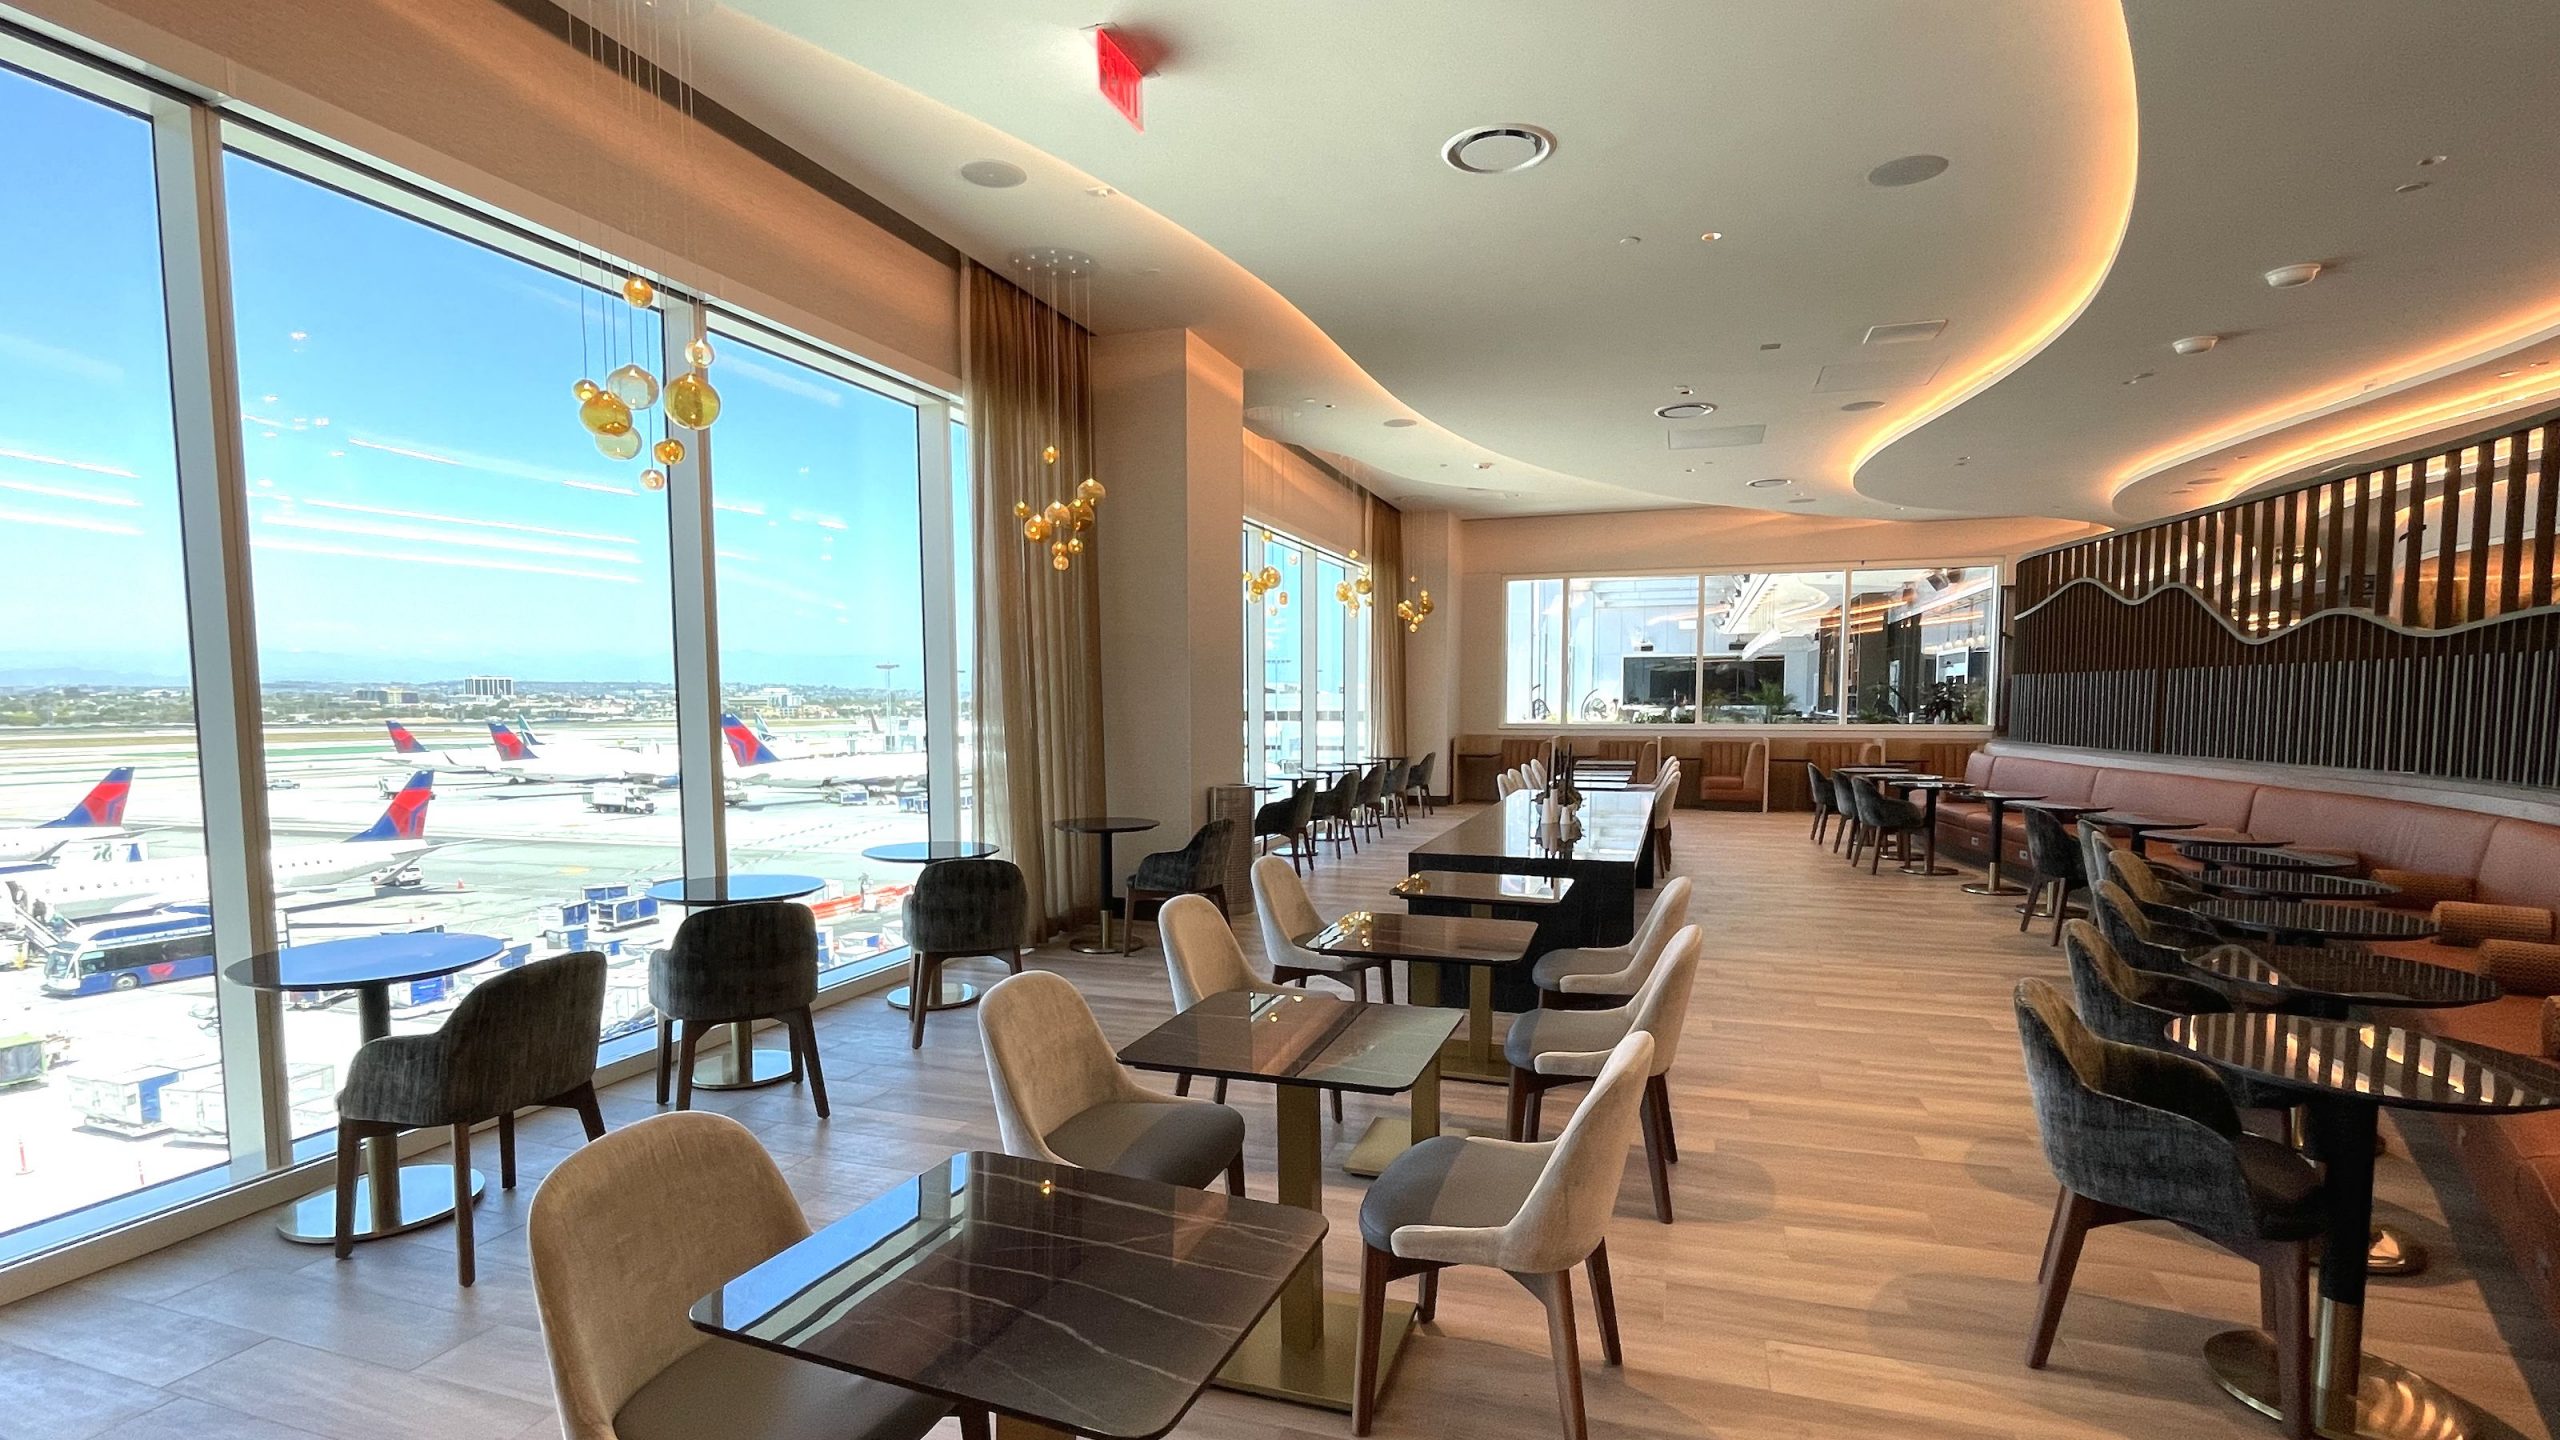 The Complete Guide To Delta Sky Club Lounges In 2022 Patabook News